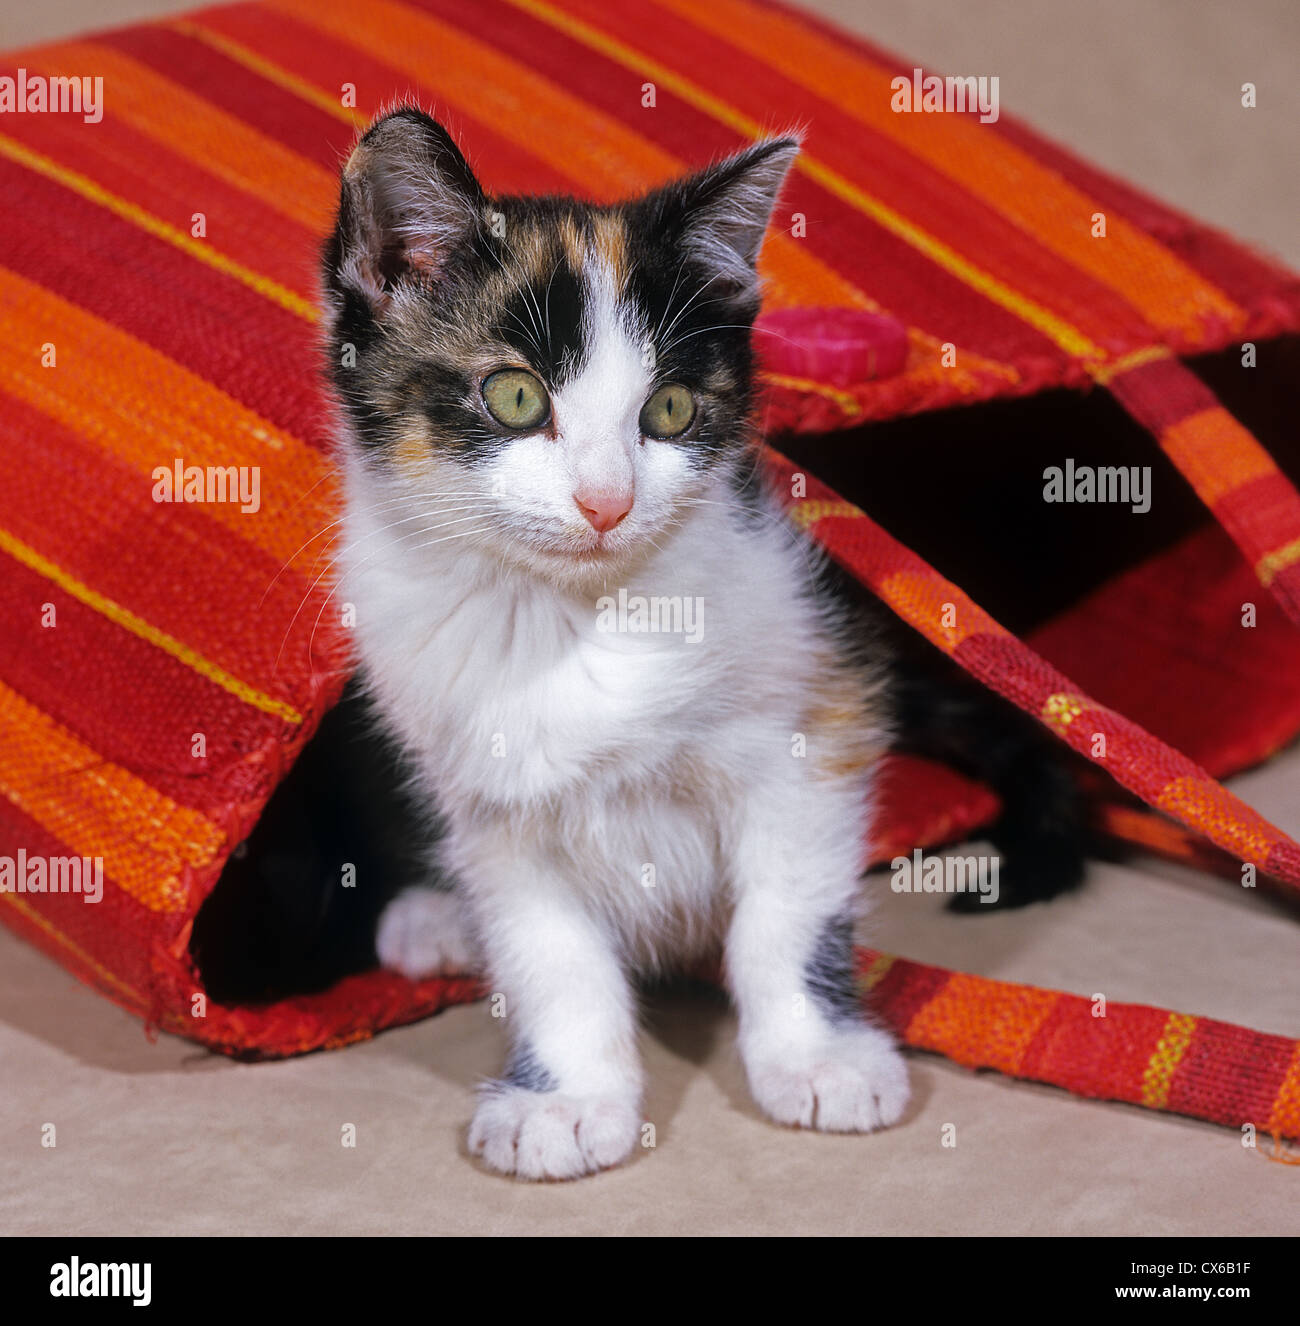 Domestic Cat. Tricolored kitten playing in a red bag Stock Photo